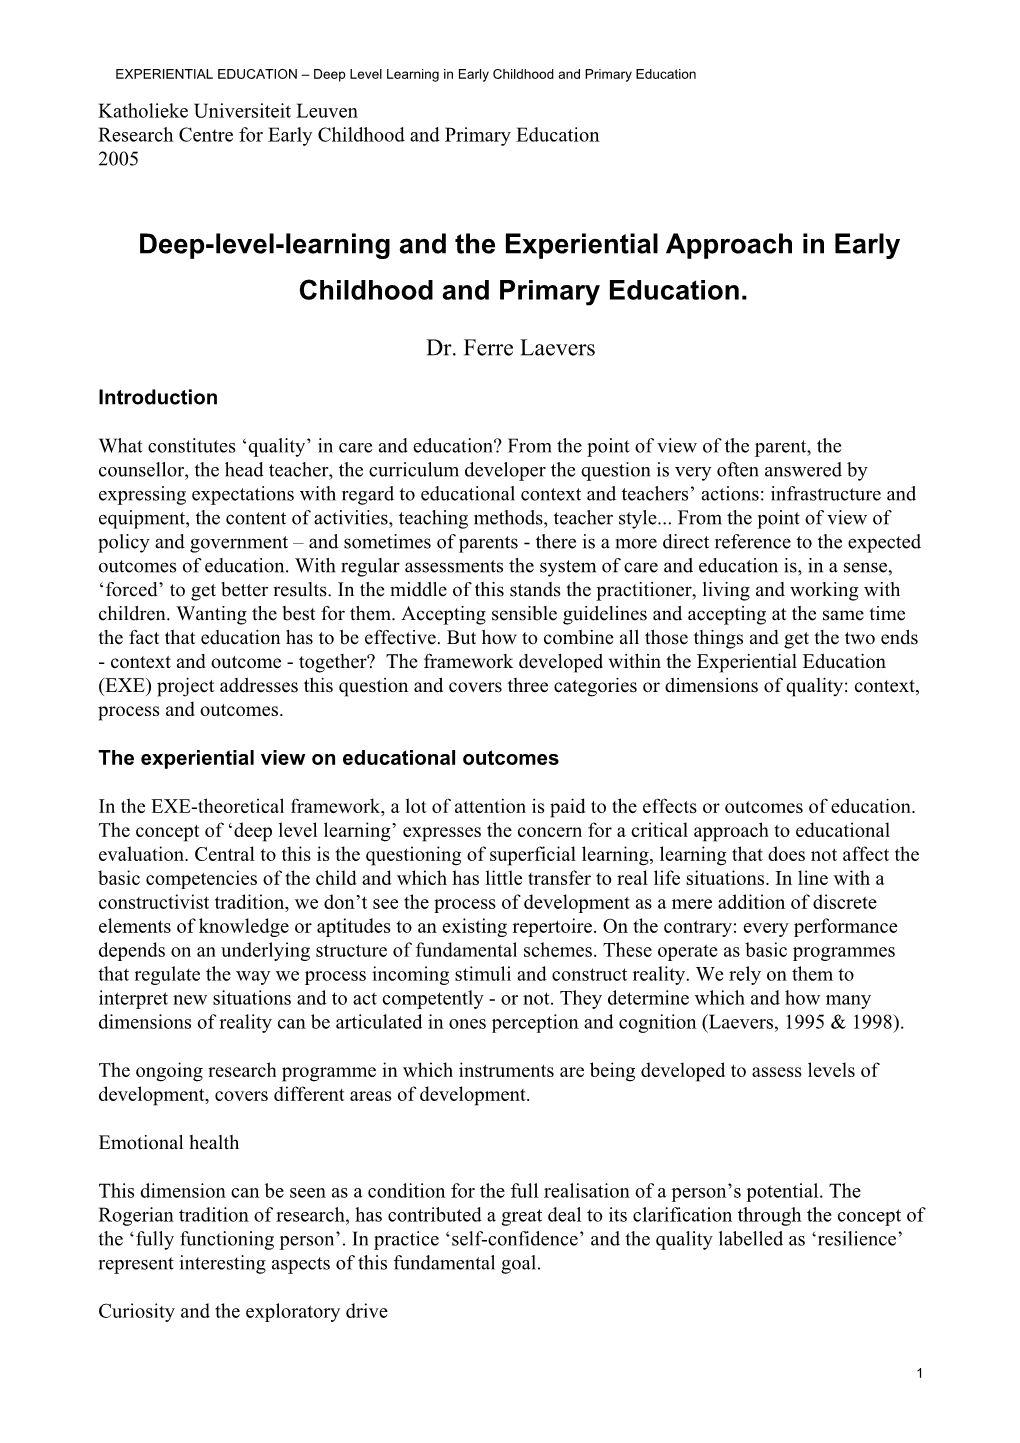 The Project Experiential Education